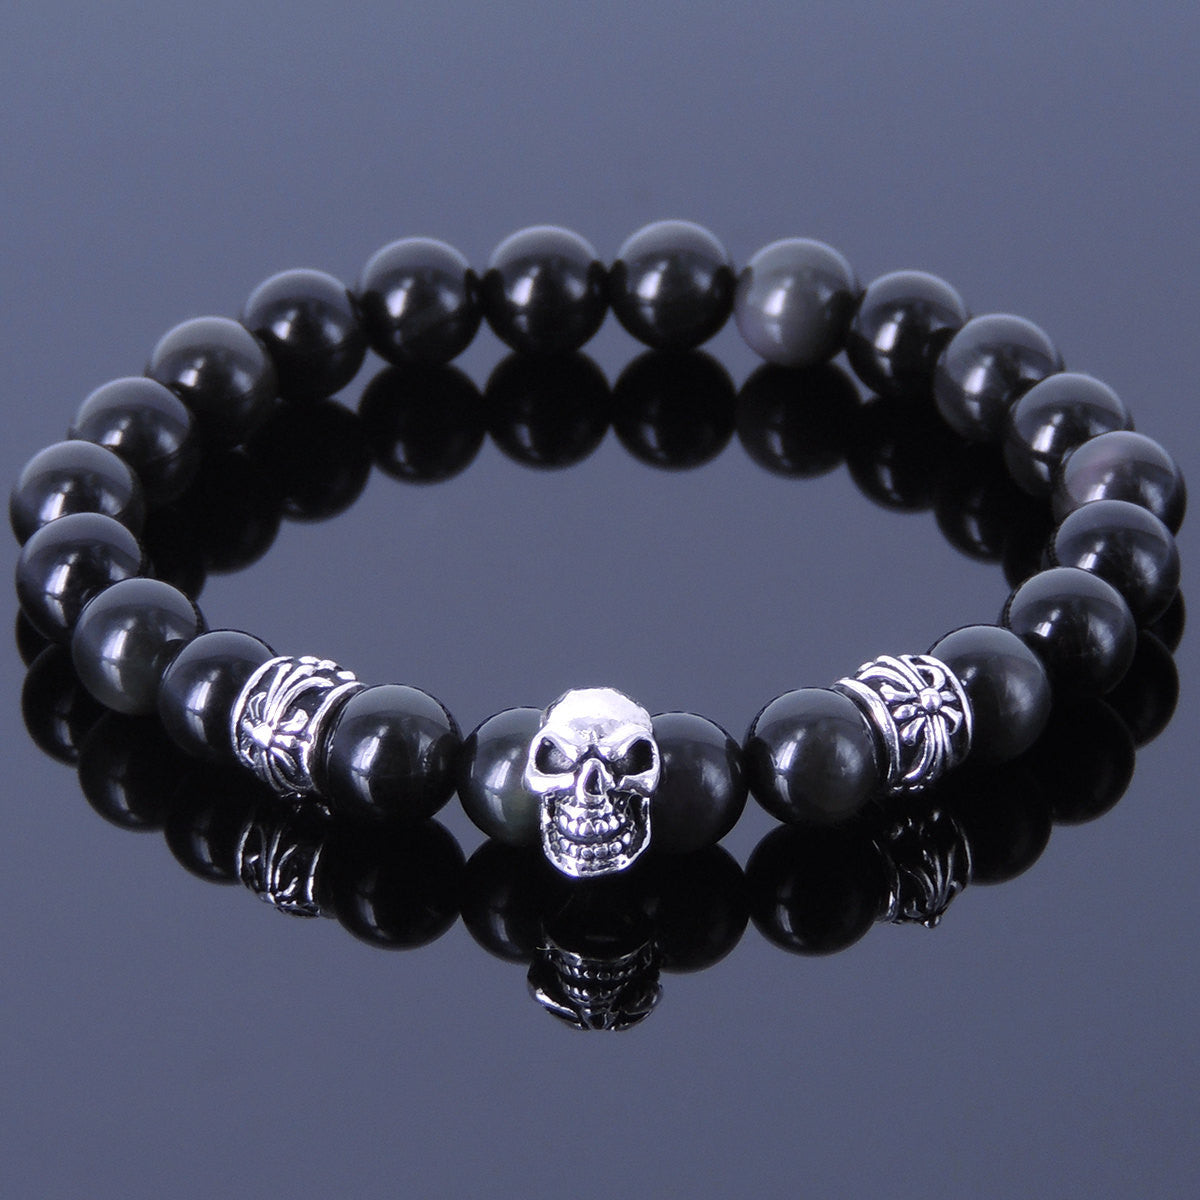 8mm Rainbow Black Obsidian Healing Gemstone Bracelet with S925 Sterling Silver Celtic Protection Skull & Cross Spacer Beads - Handmade by Gem & Silver BR224